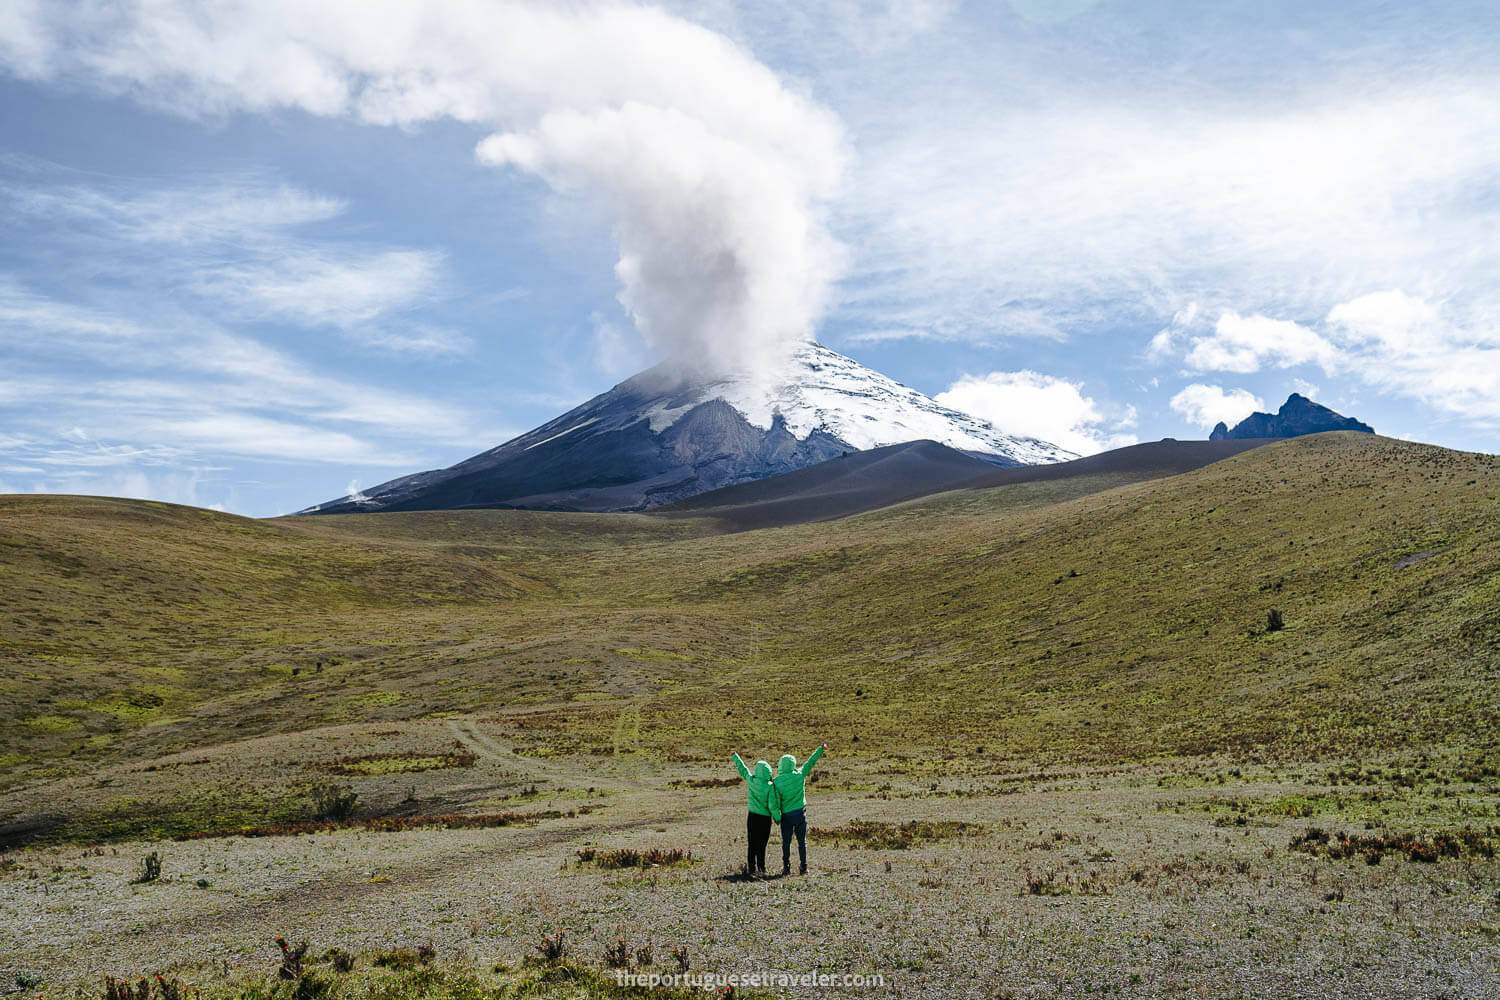 Edwin and Samy posing with Cotopaxi